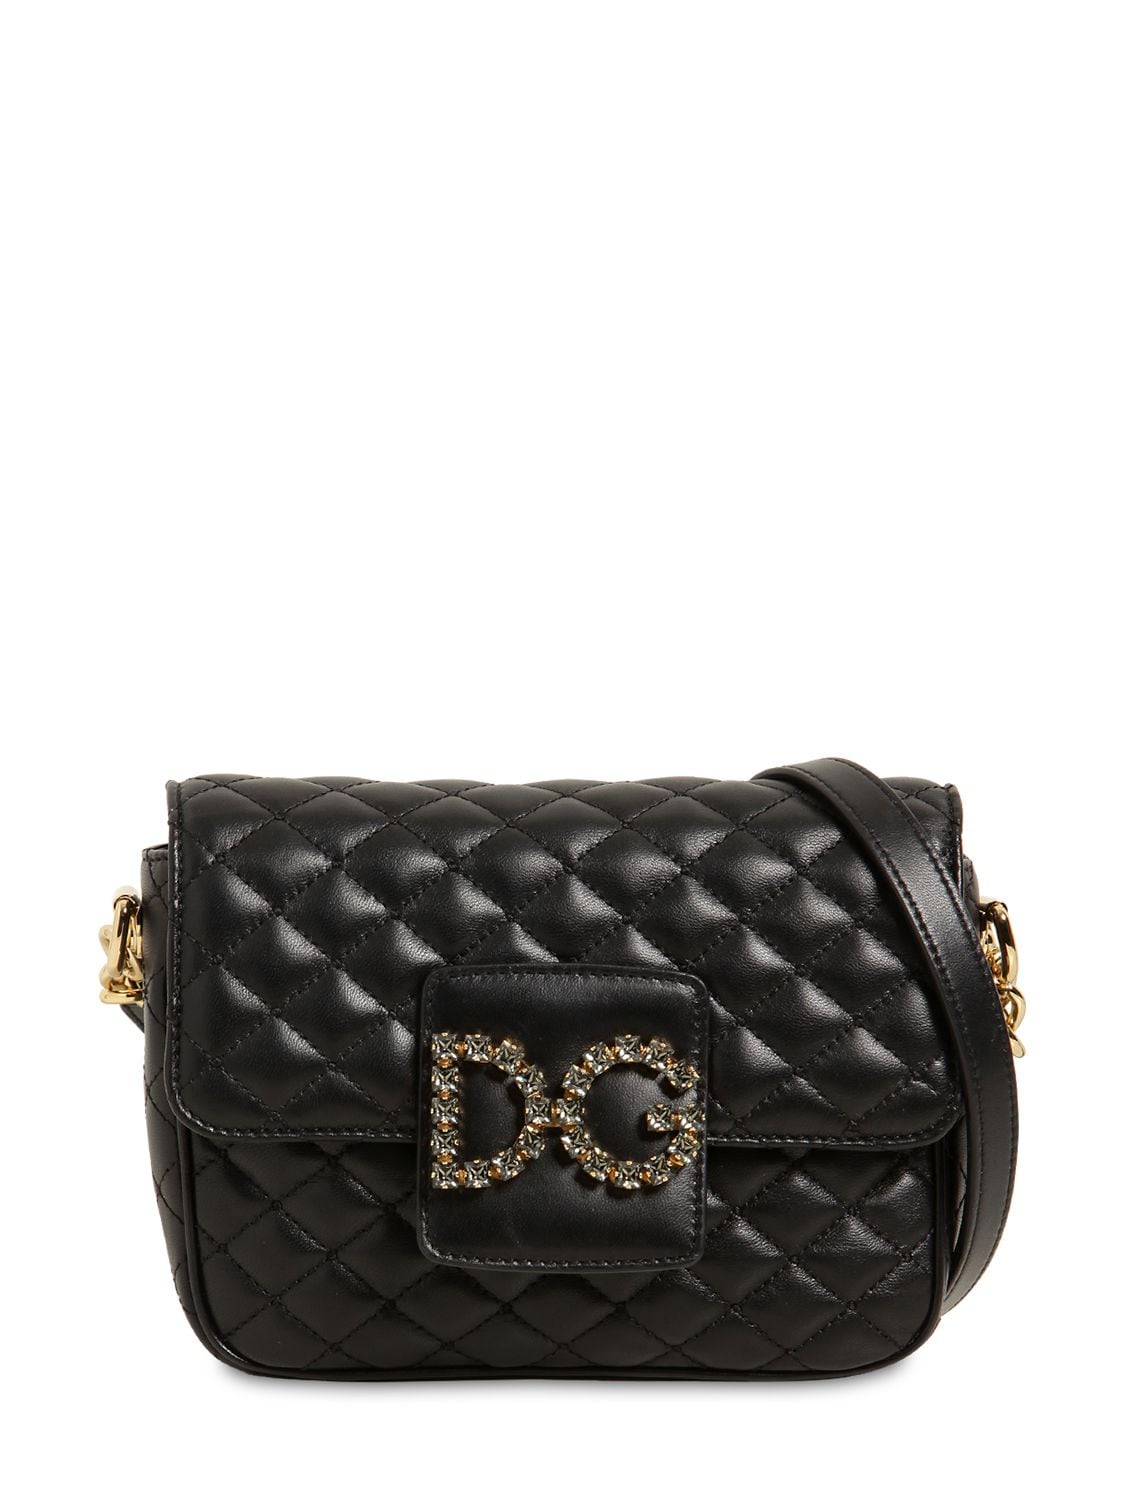 DOLCE & GABBANA SMALL MILLENNIAL QUILTED LEATHER BAG,68I0CE010-ODA5OTK1